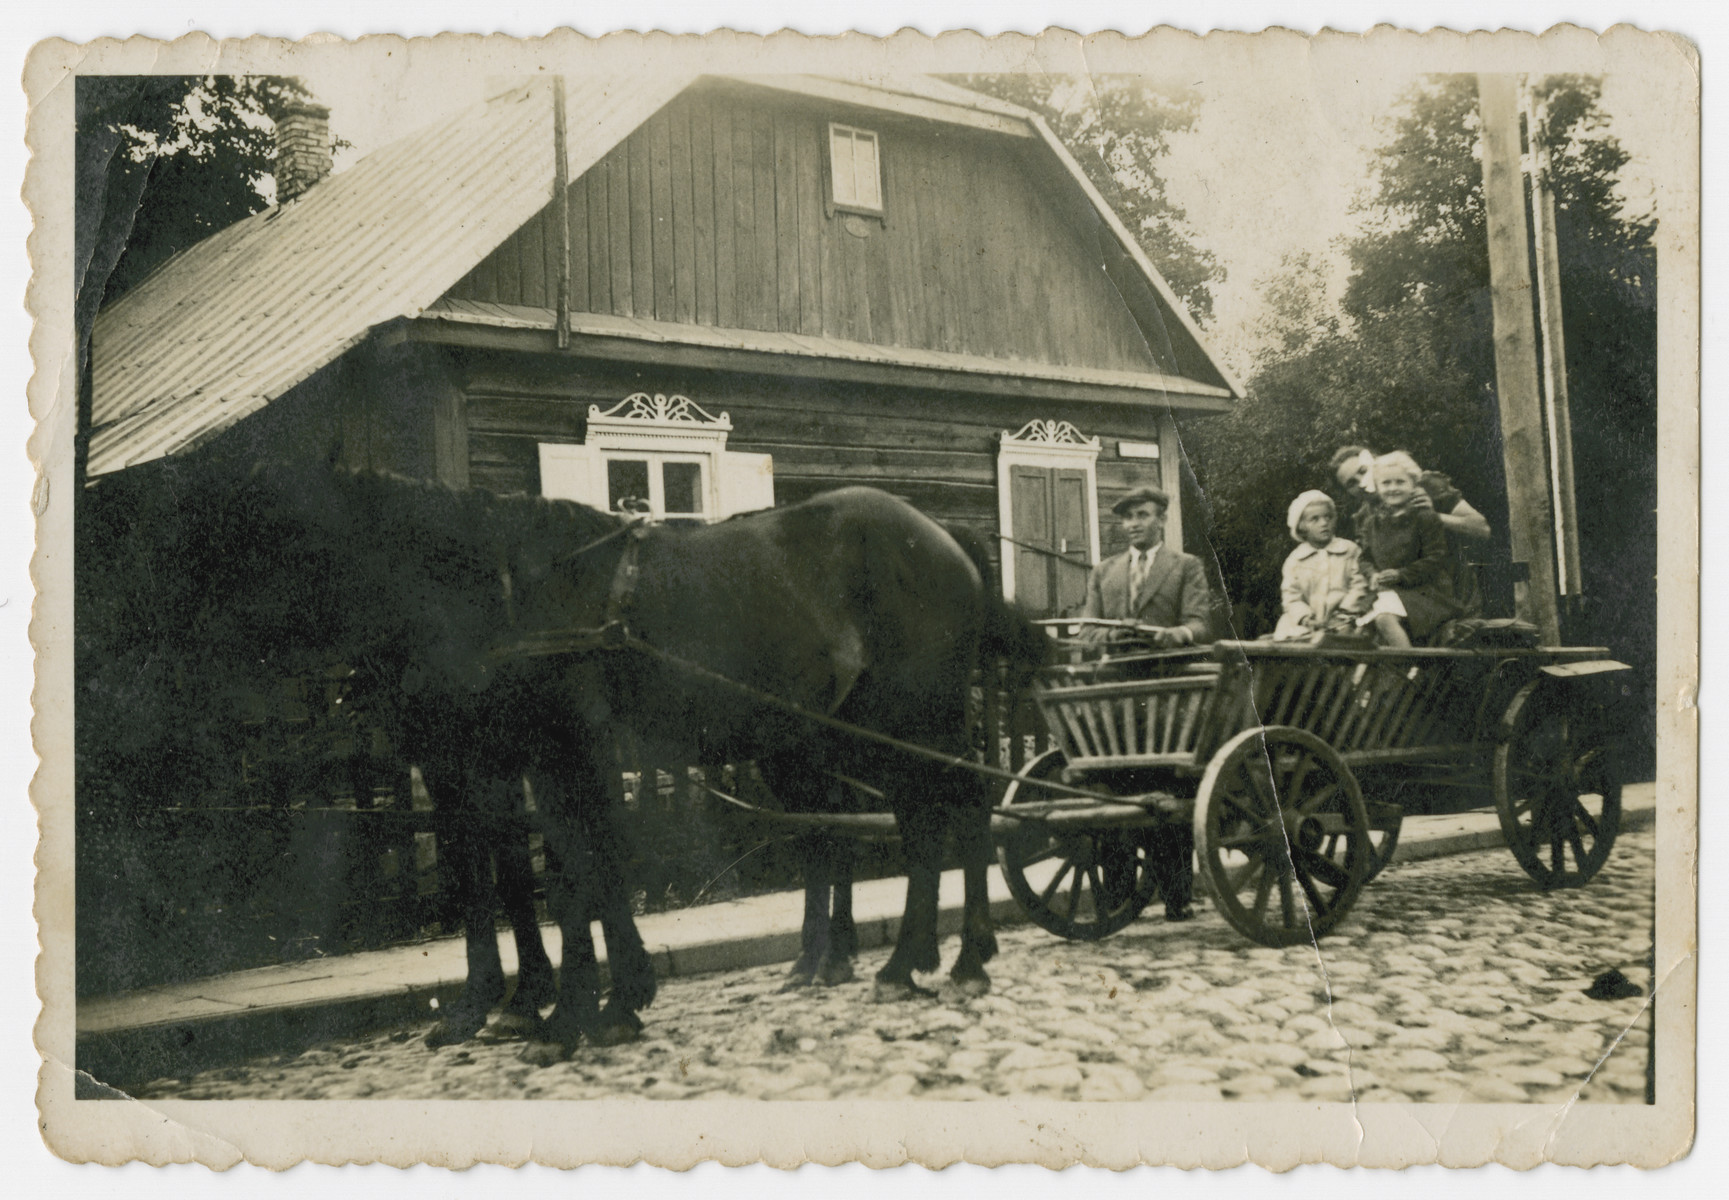 A group or people ride in a horse drawn cart down a street in prewar Butrimonys.

Part of a collection of photographs depicting Jews from Butrimonys where some 750 Jews were rounded up and murdered by the Einsatzgruppen and Lithuanian collaborators after the invasion of the USSR.Part of a collection of photographs depicting Jews from Butrimonys. Some 750 Jews were rounded up and murdered by the Einsatzgruppen and Lithuanian collaborators after the invasion of the USSR.